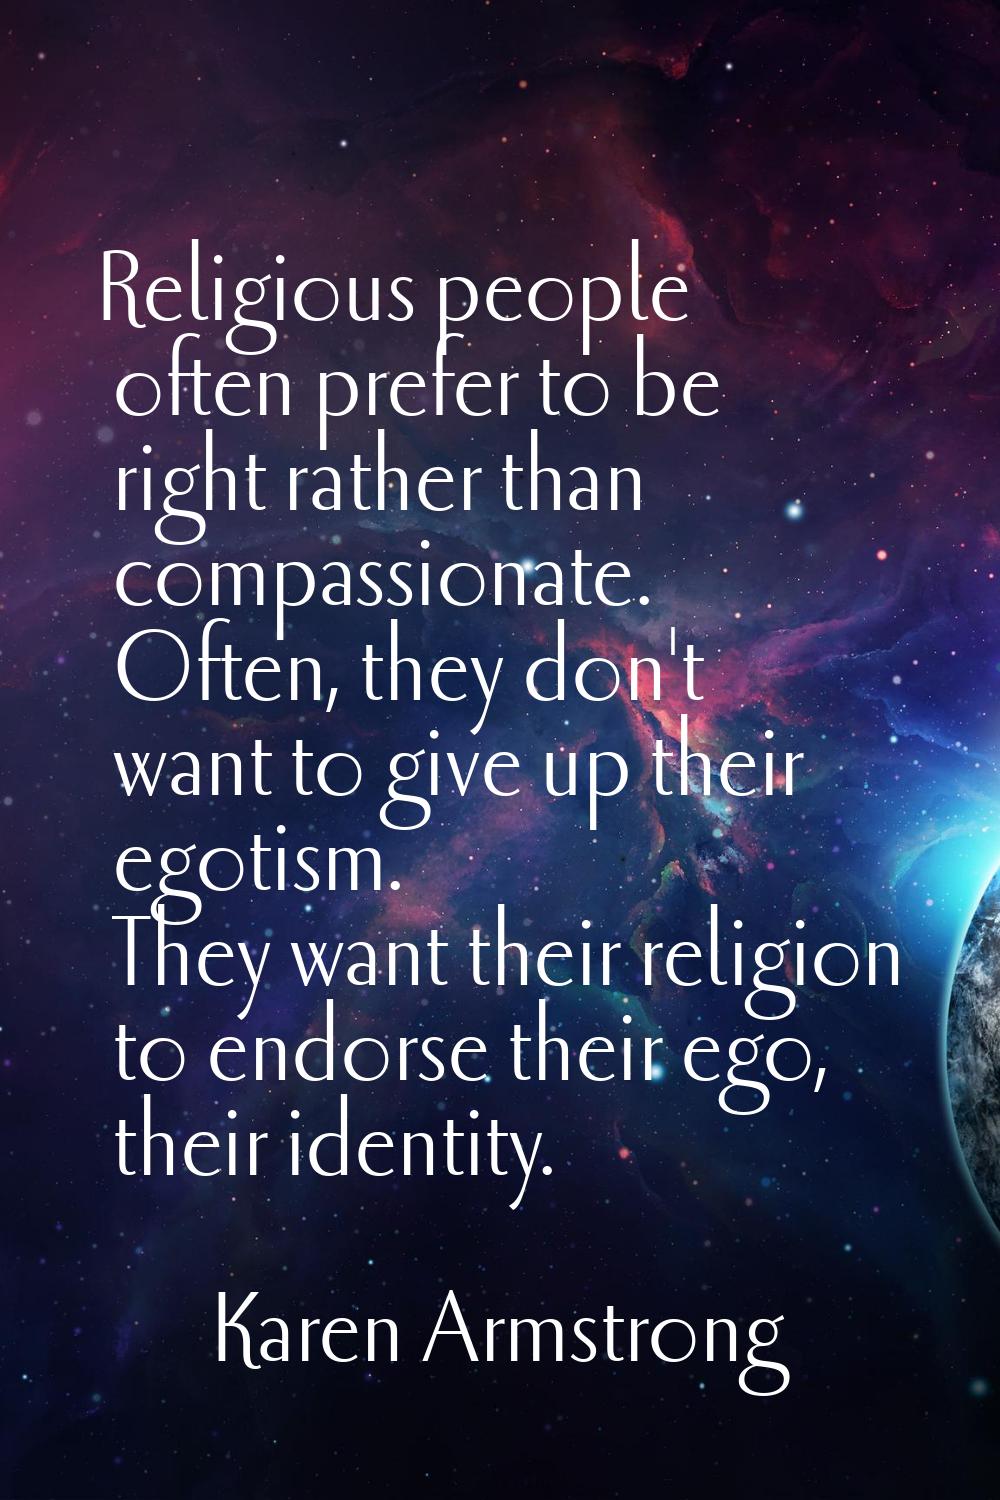 Religious people often prefer to be right rather than compassionate. Often, they don't want to give